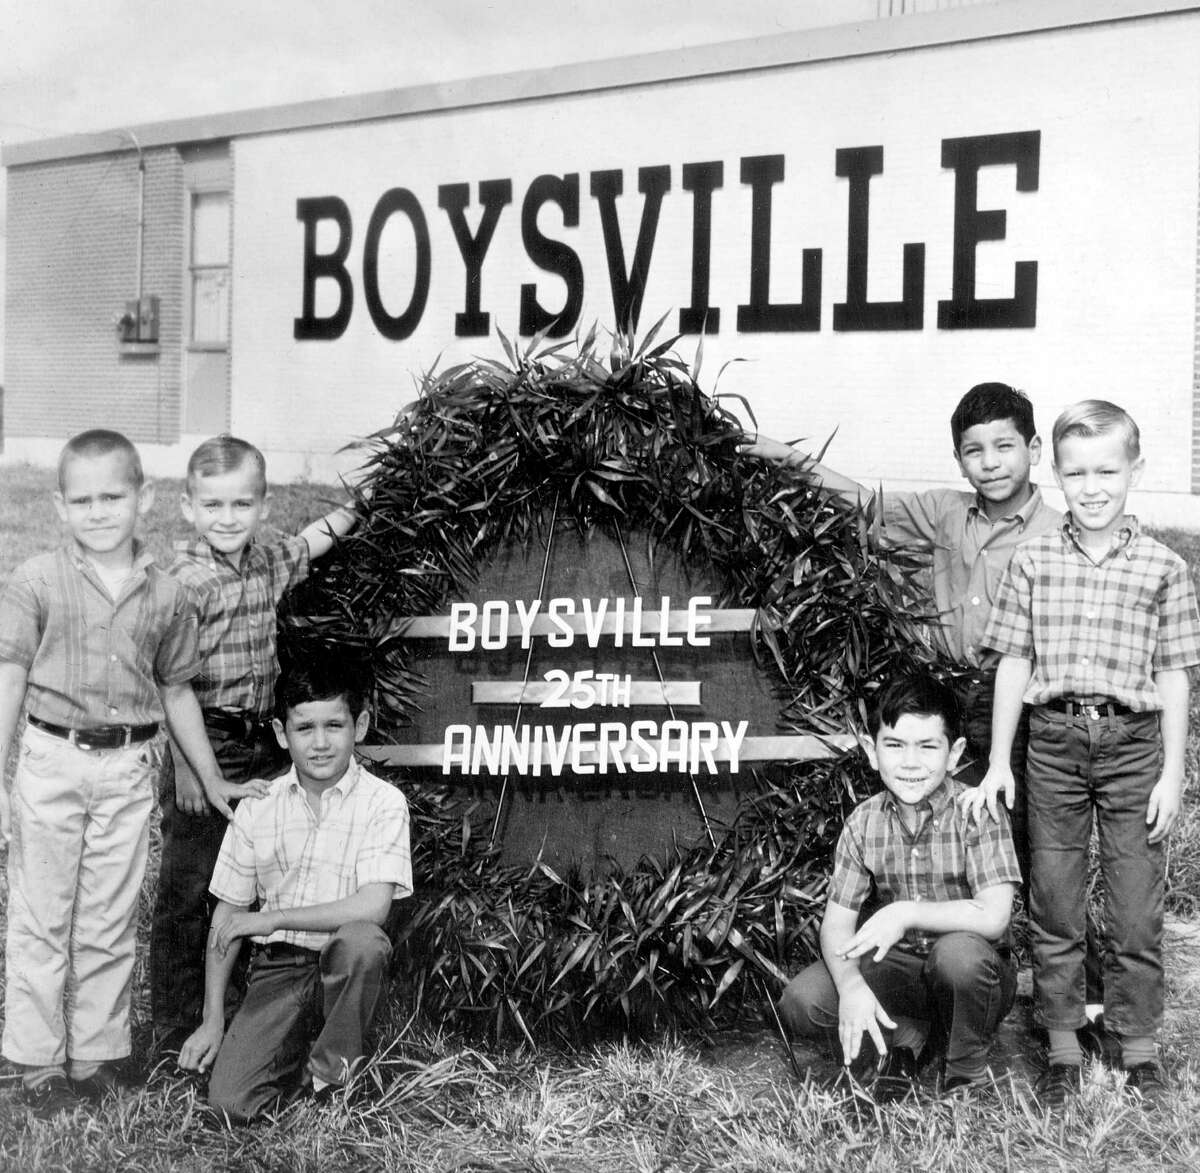 Six young boys are positioned around a sign proclaiming the 25th anniversary of Boysville in a June 12, 1968, photo.